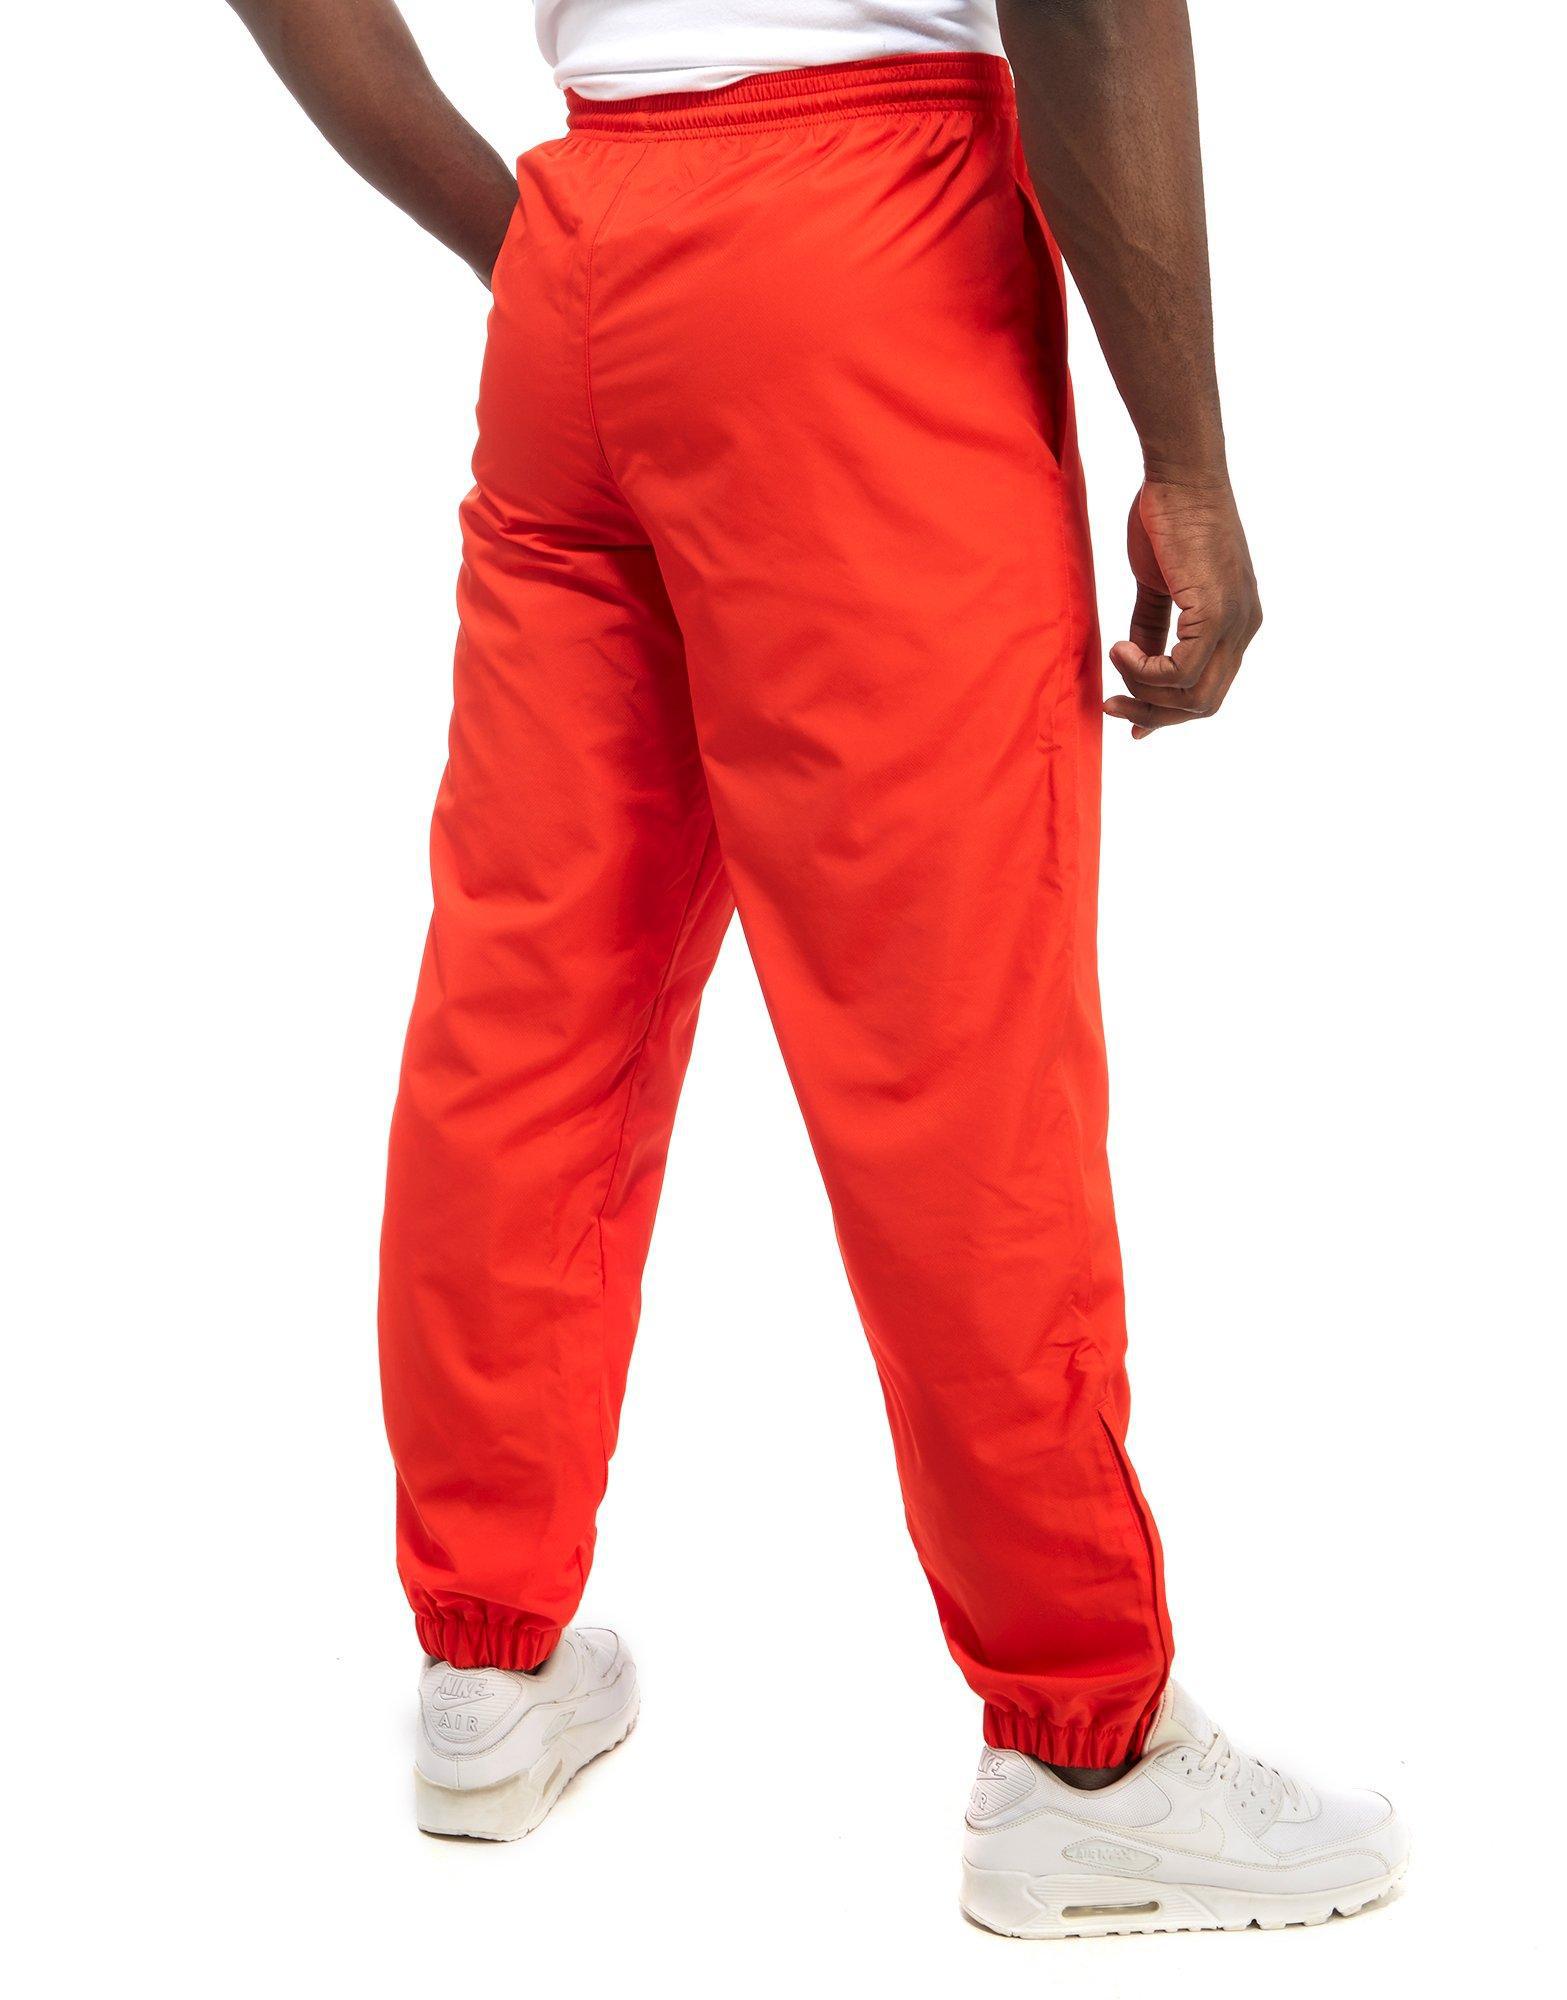 Lacoste Synthetic Guppy Track Pants in Red for Men - Lyst